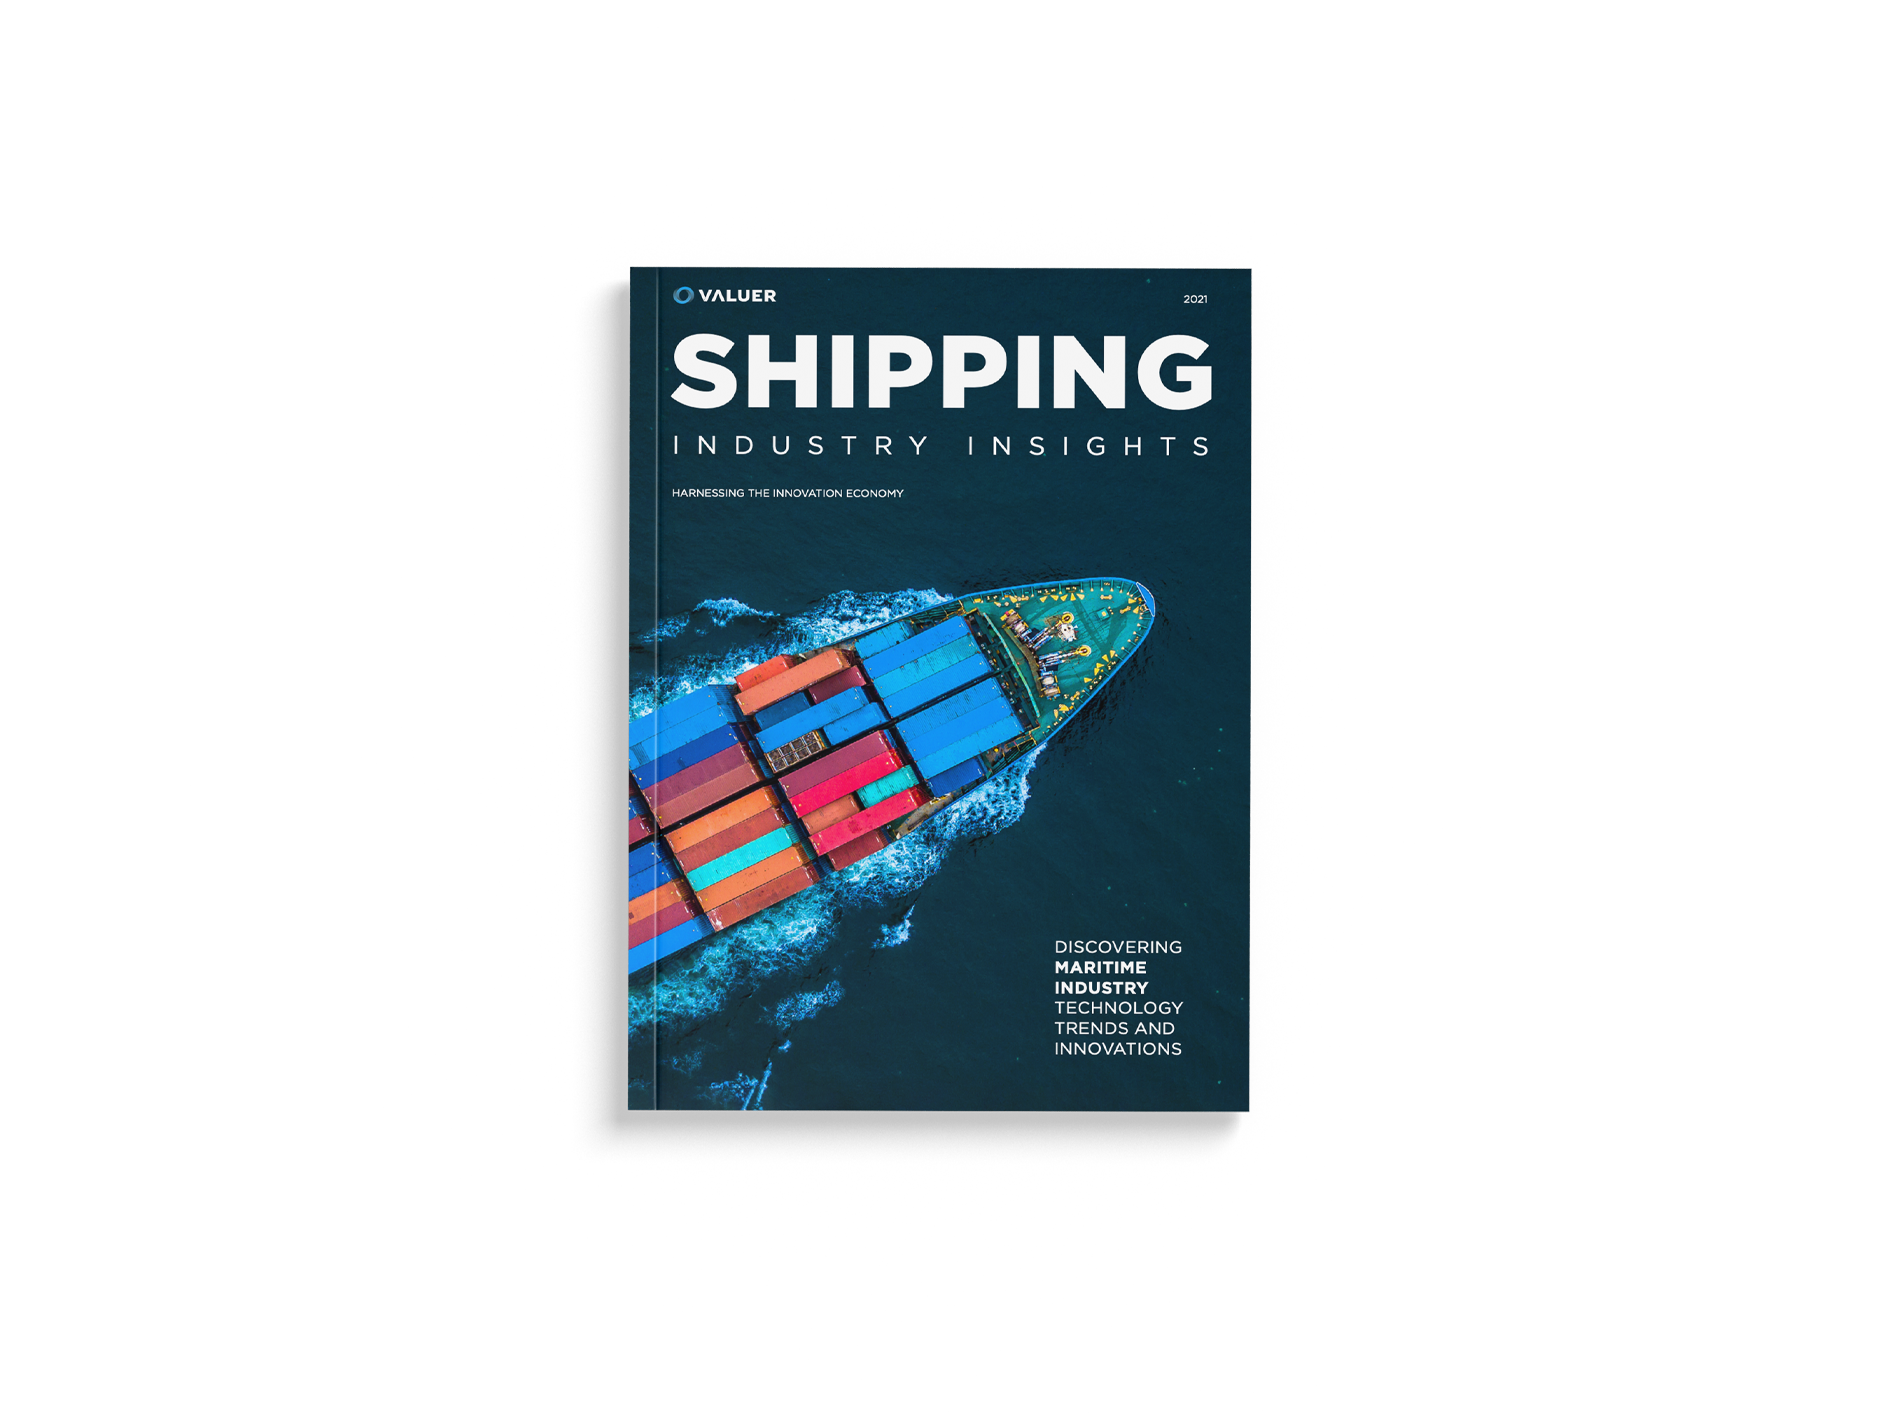 Shipping Industry Case Study